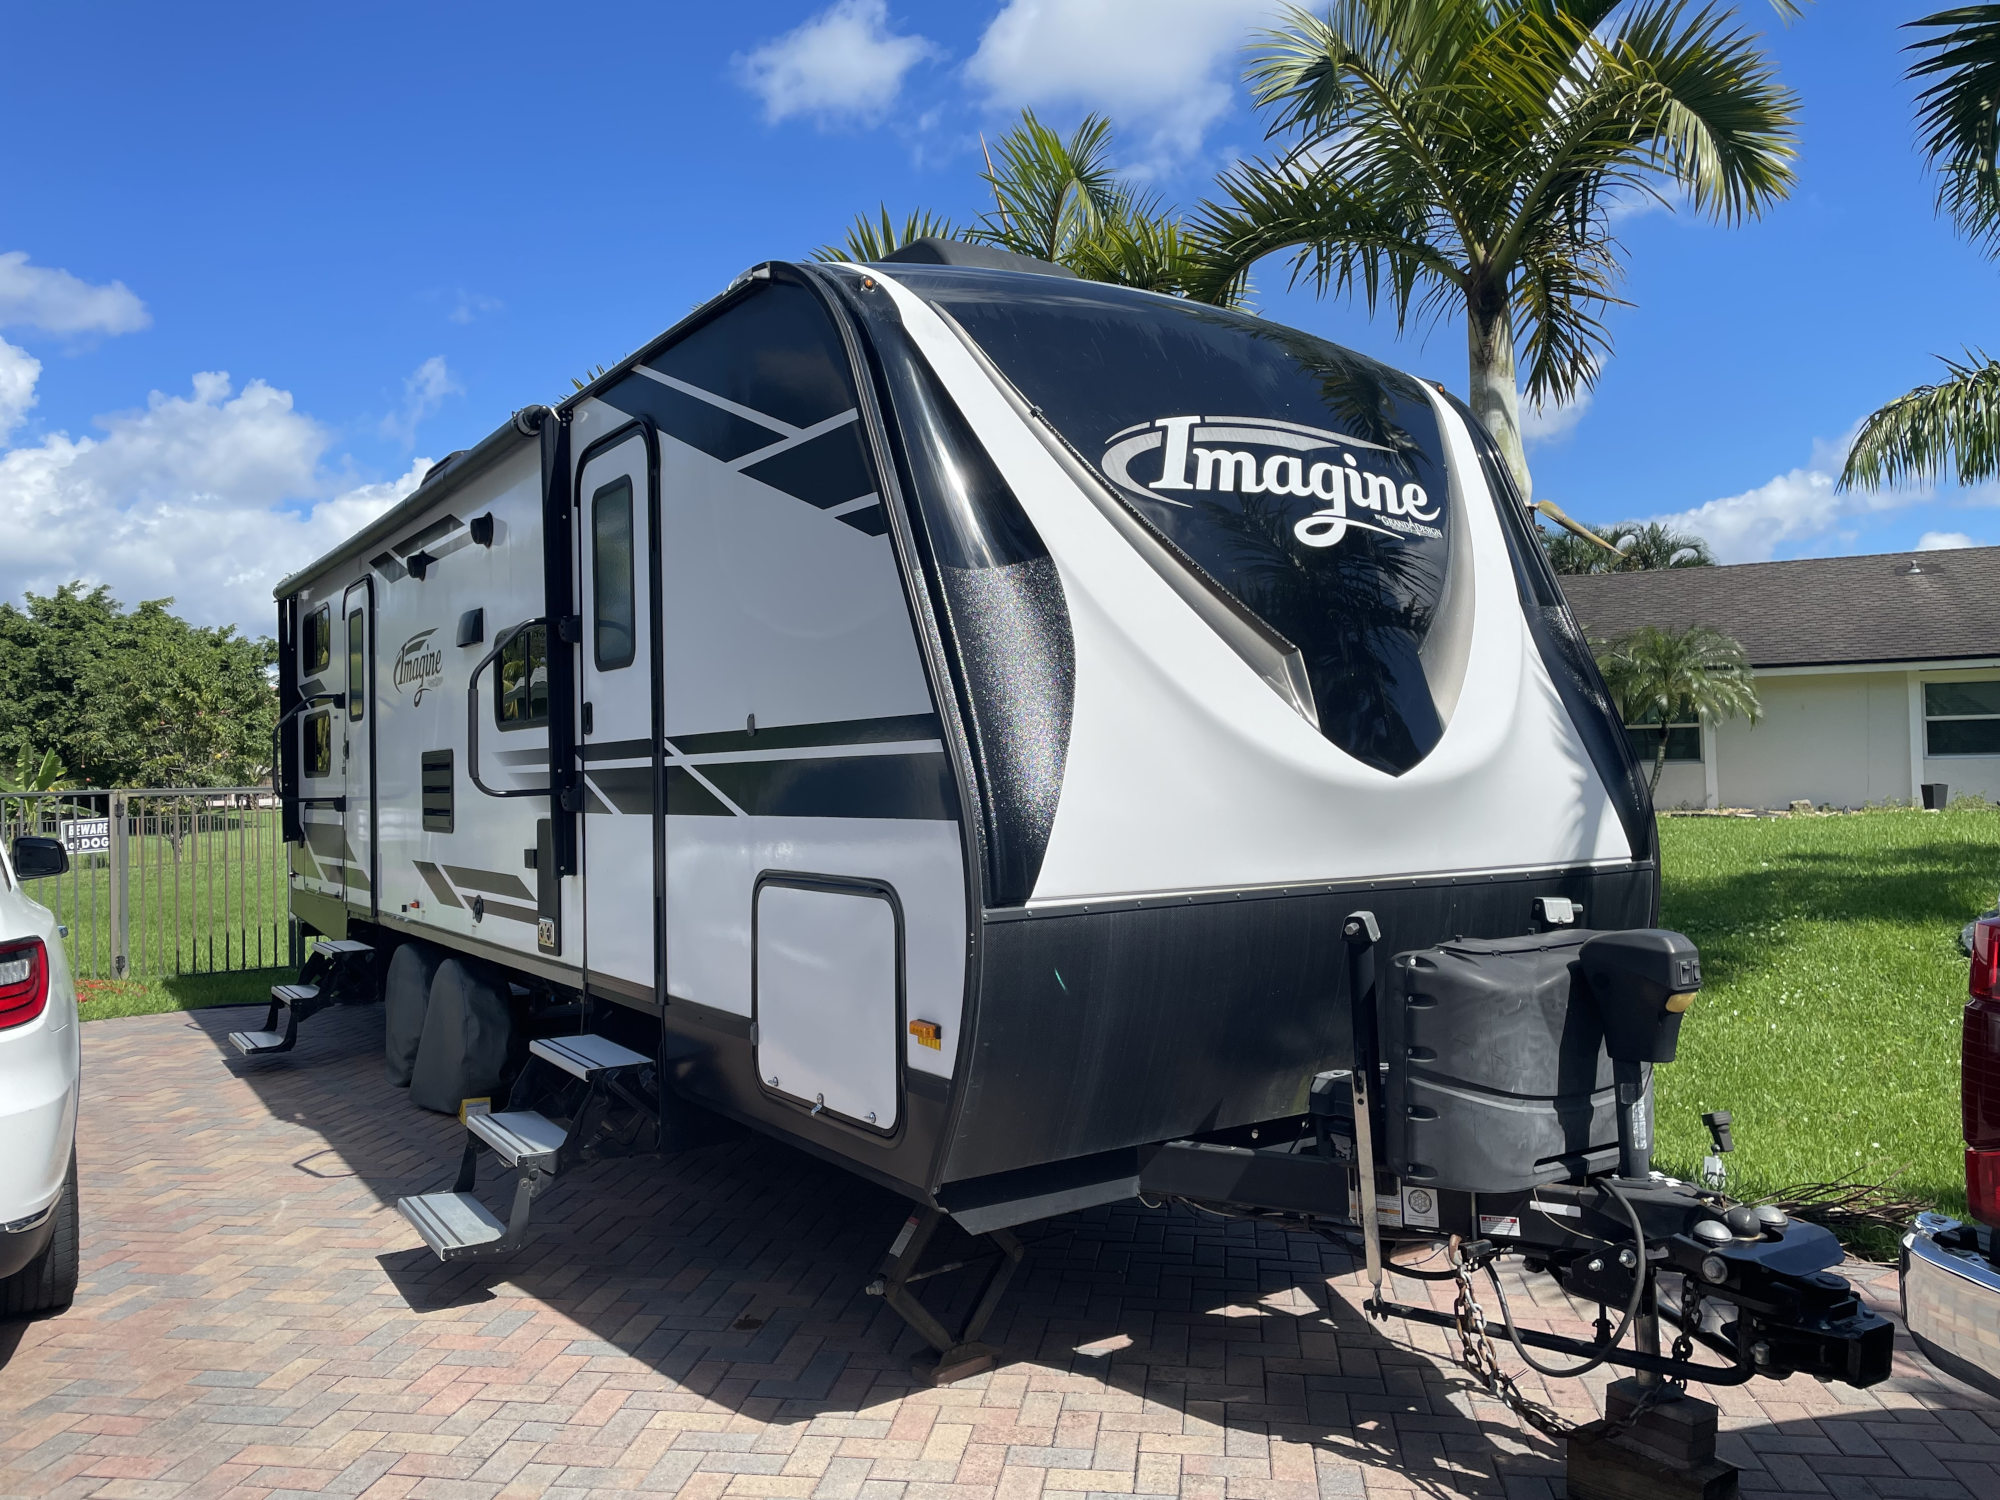 Minifying Family Life into an RV